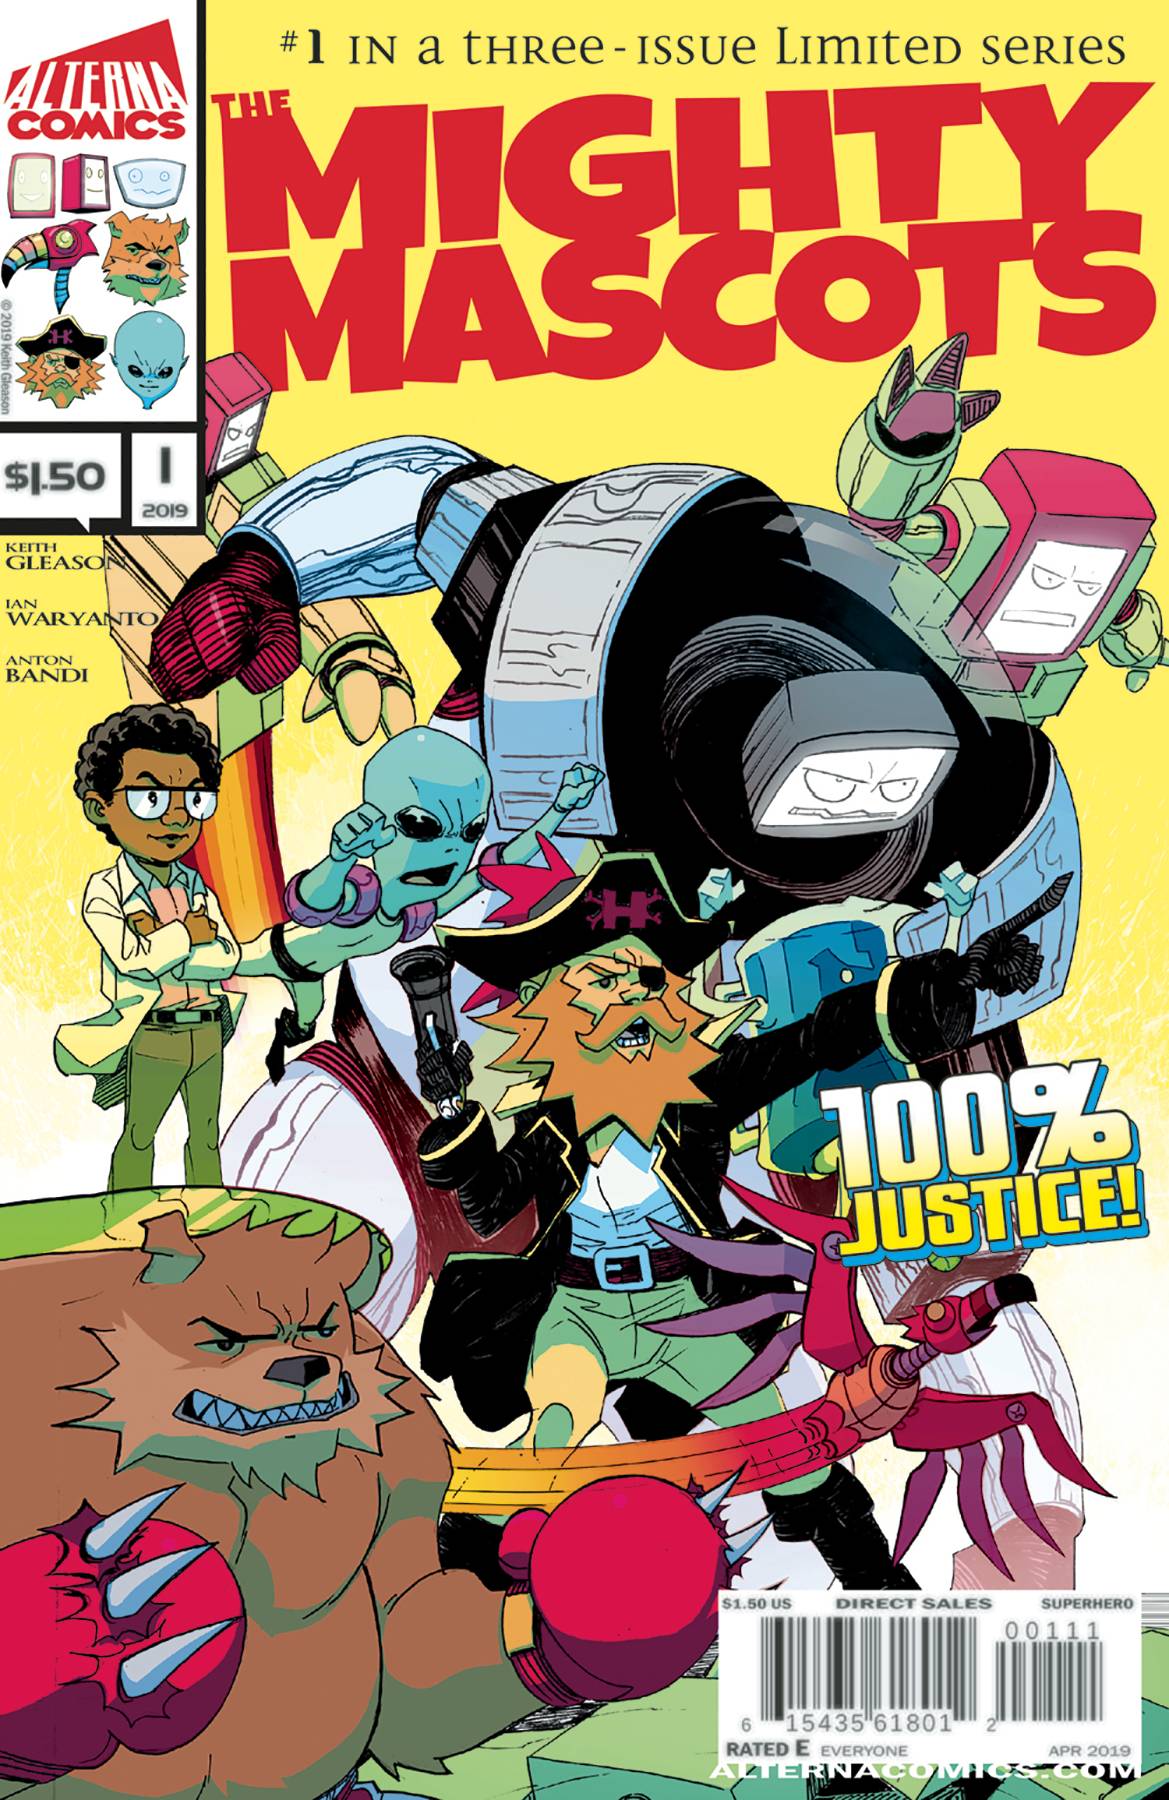 Mighty Mascots #1 (Of 3)